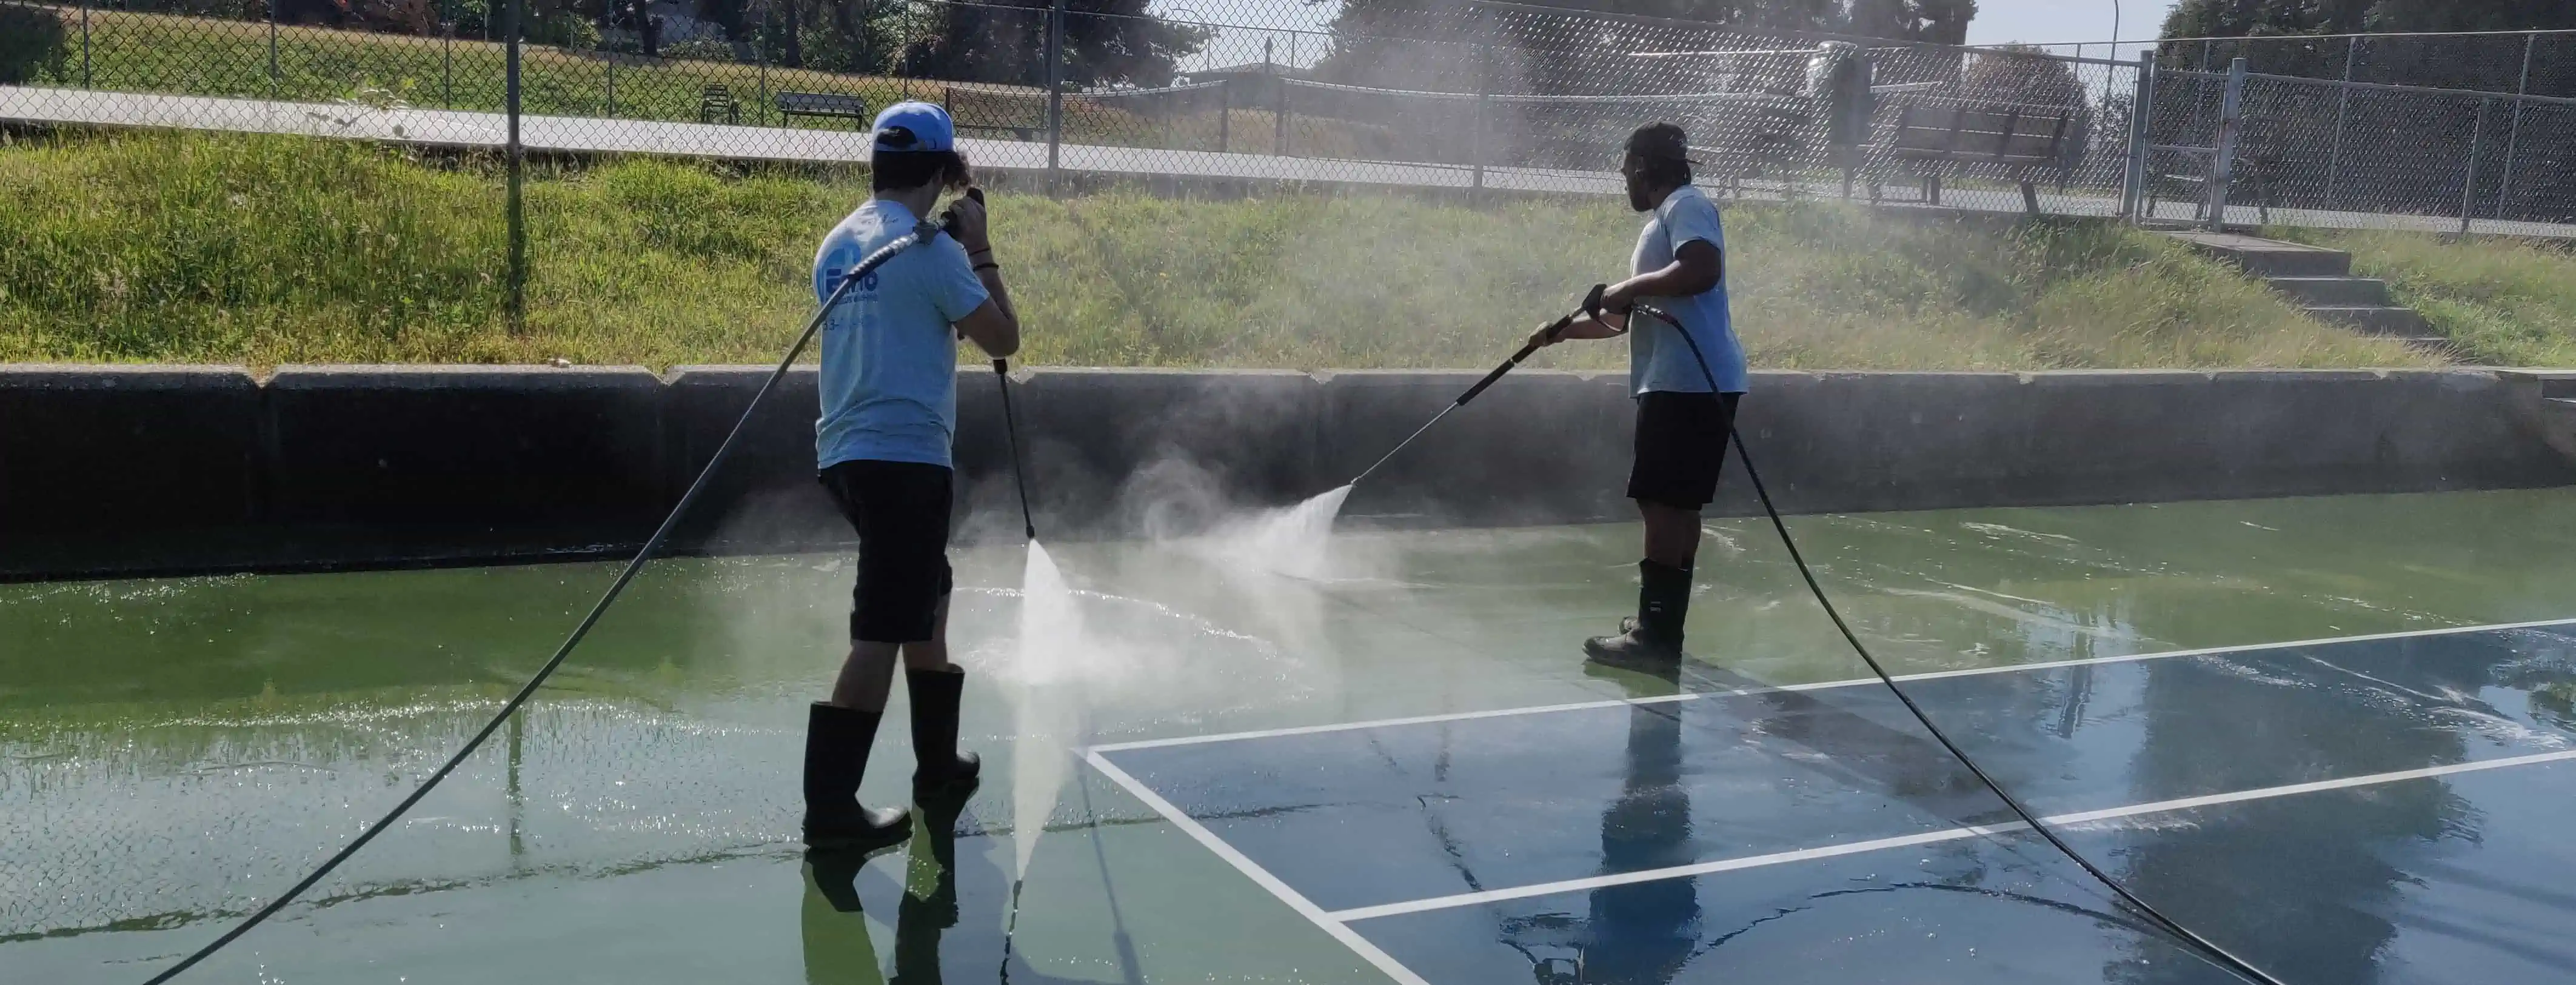 North Vancouver tennis courts cleaning smooth surface